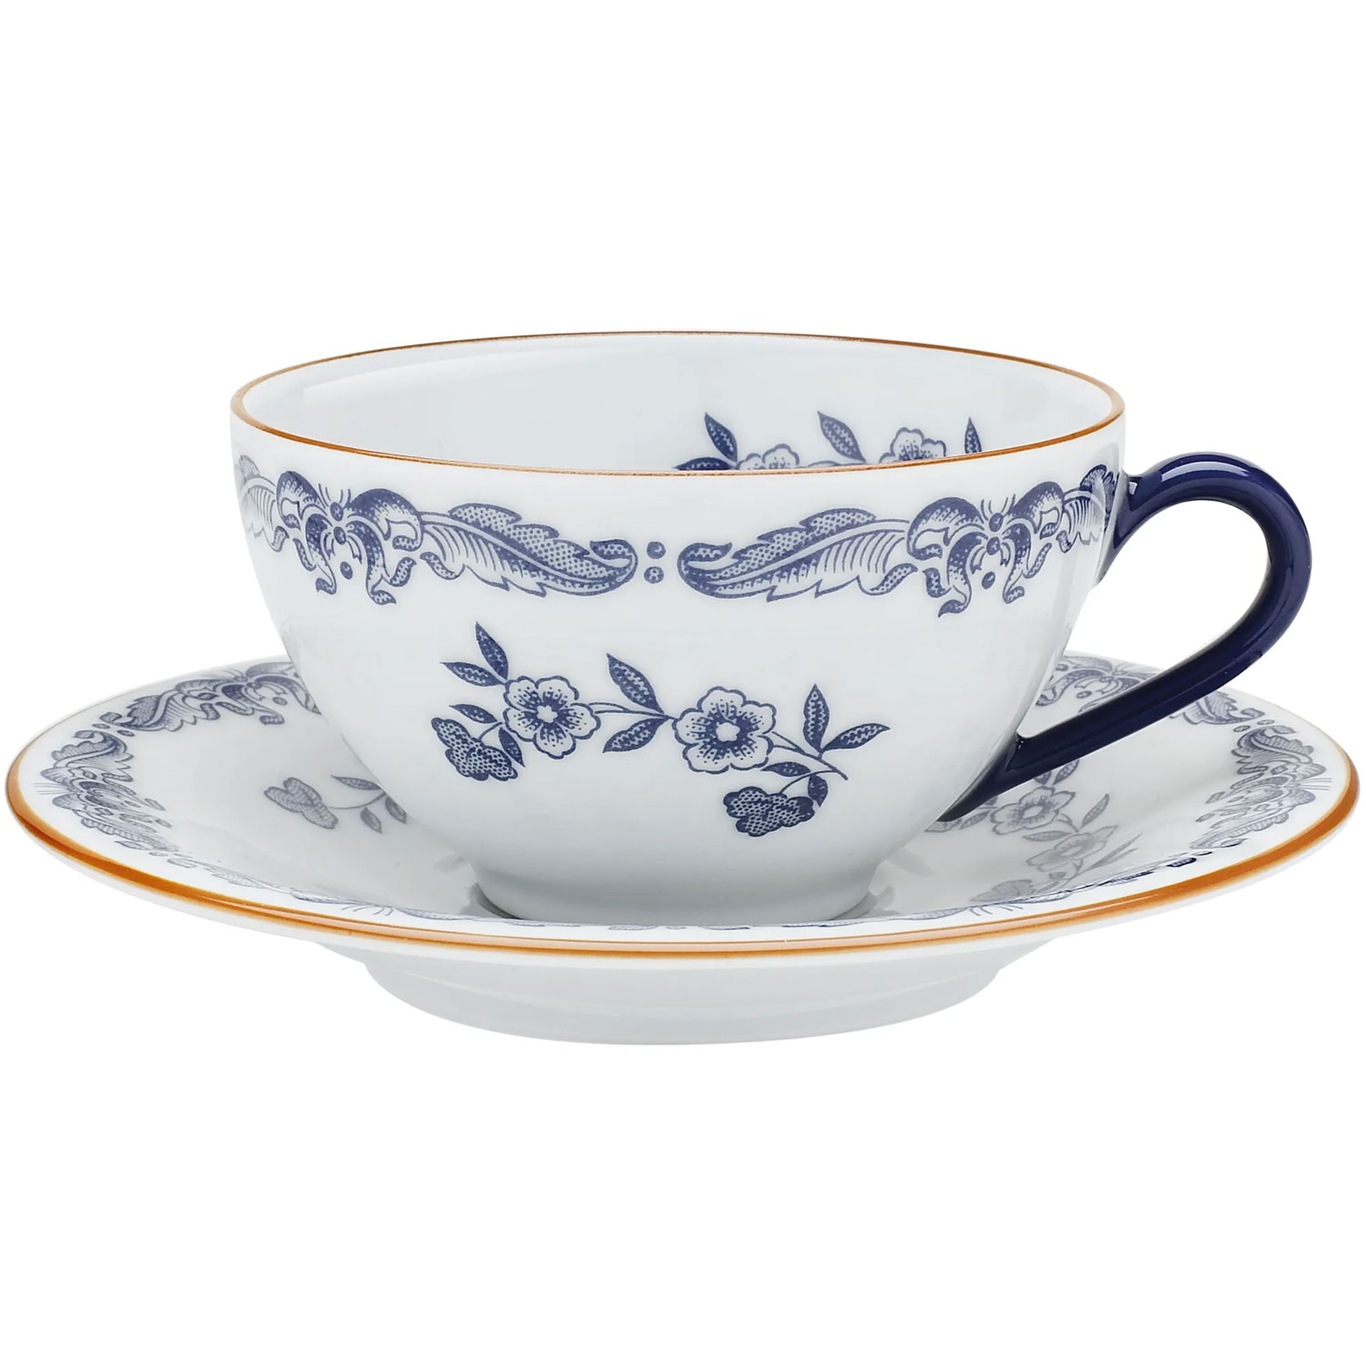 Ostindia Coffee Cup With Saucer, 16 cl